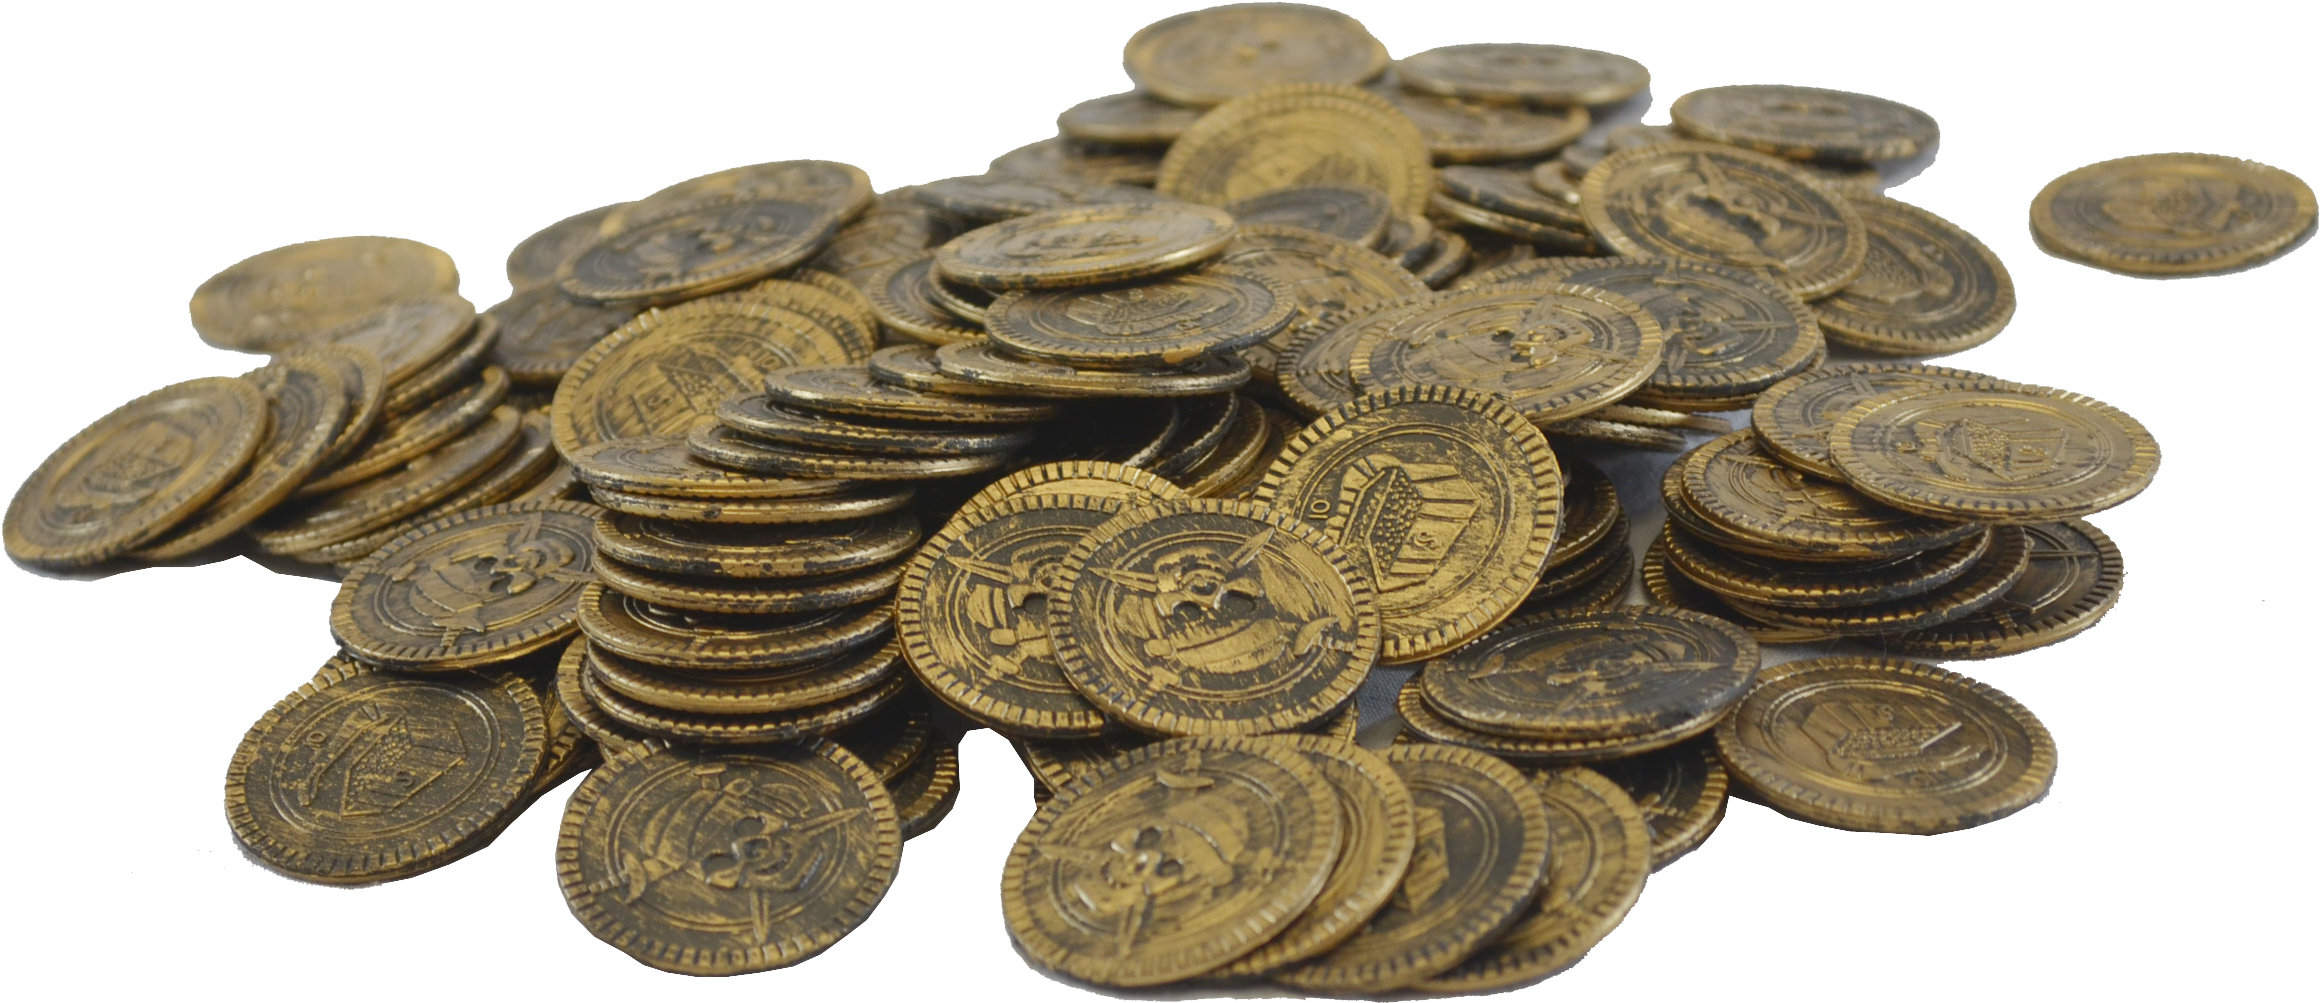 download coin png image rummage sale generic lot of 144 toy pirate treasure coins png image with no background pngkey com 144 toy pirate treasure coins png image